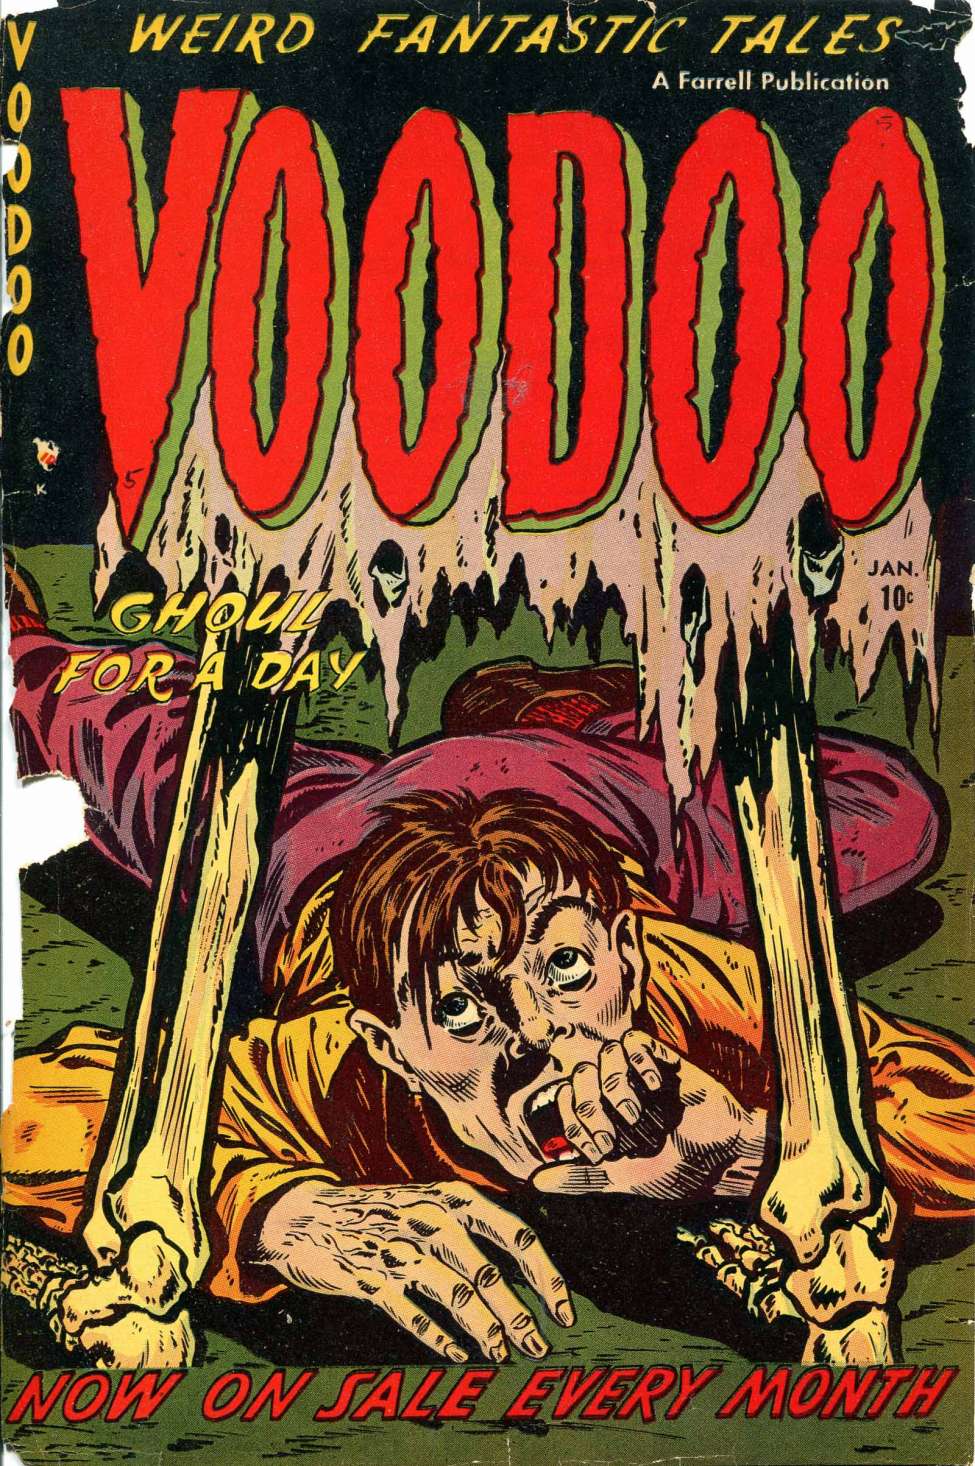 Book Cover For Voodoo 5